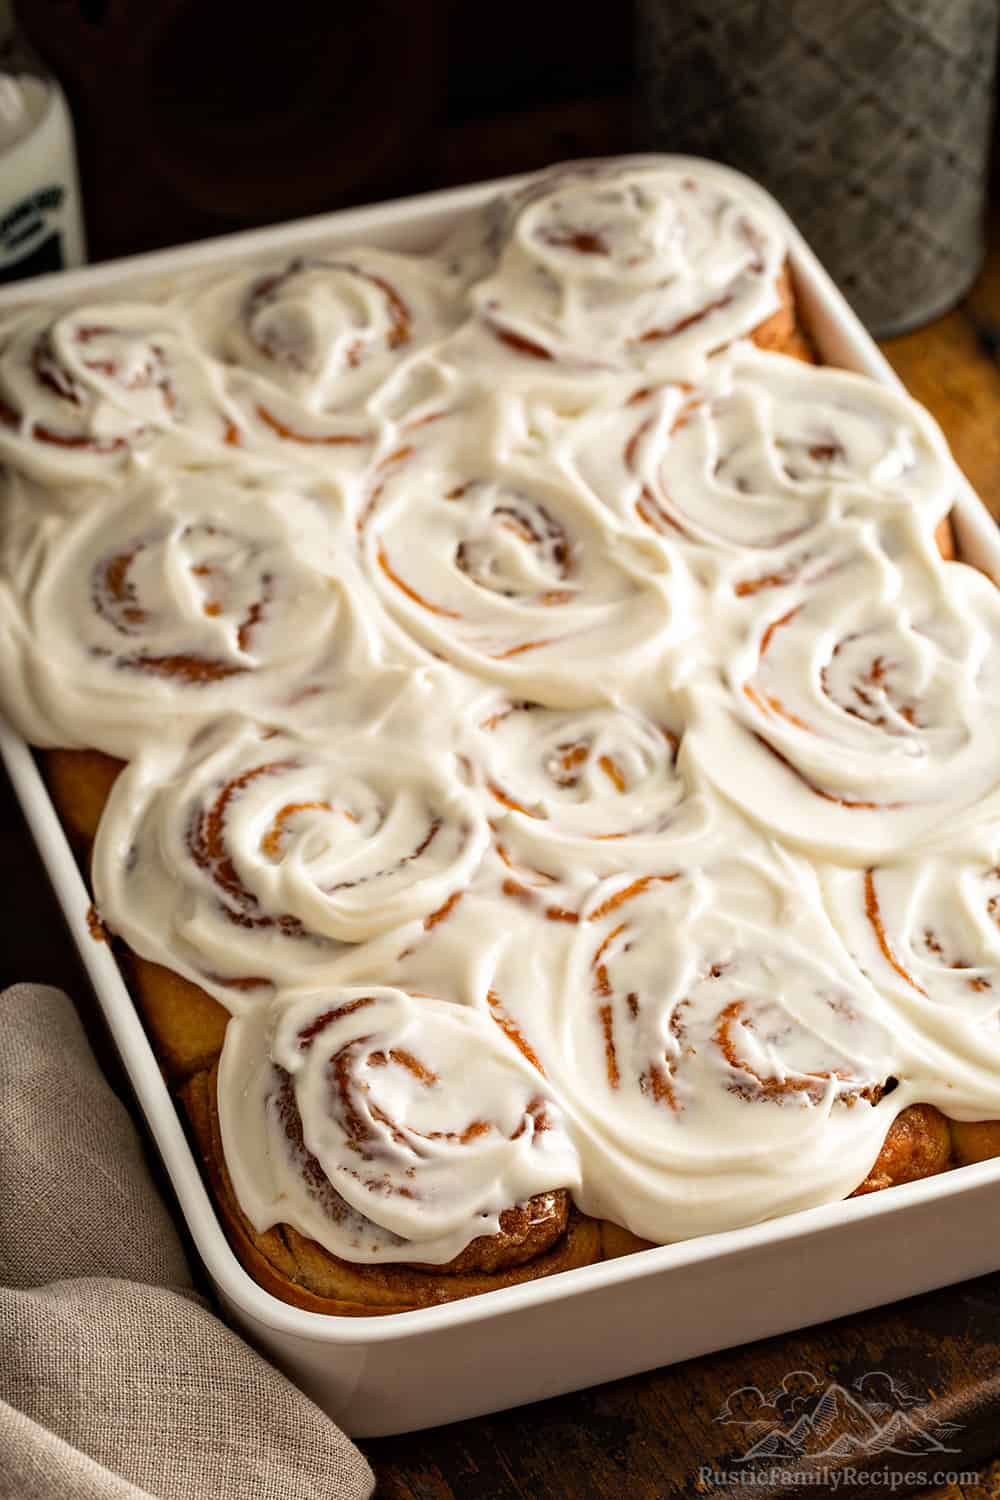 Frosted cinnamon rolls in a baking dish